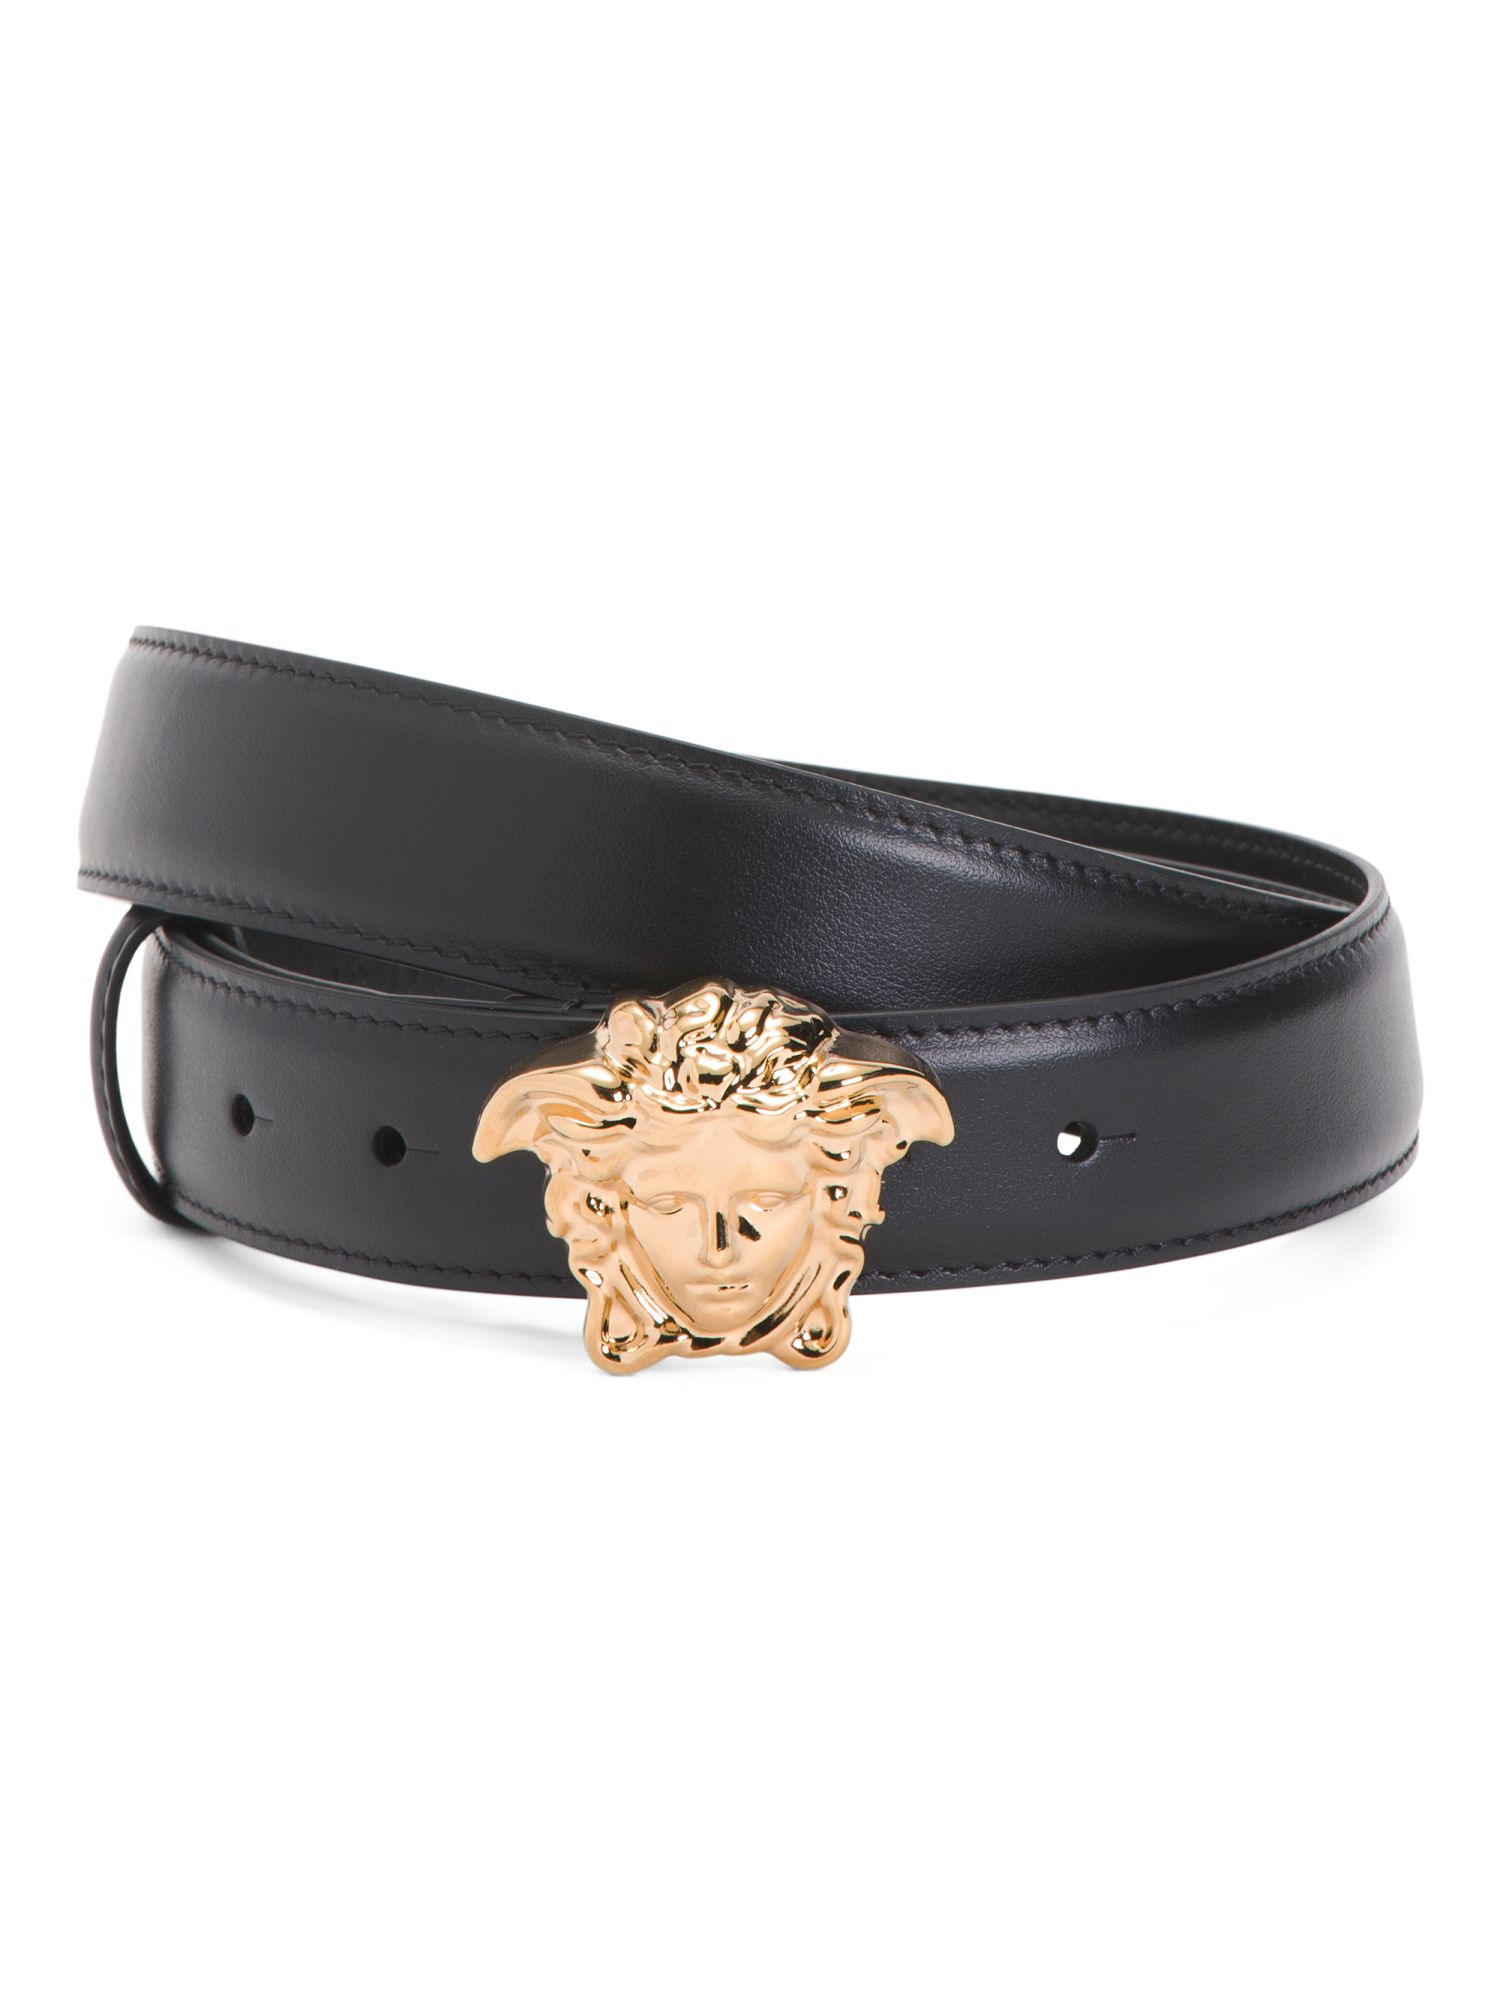 Made In Italy Leather La Medusa Buckle Belt | TJ Maxx